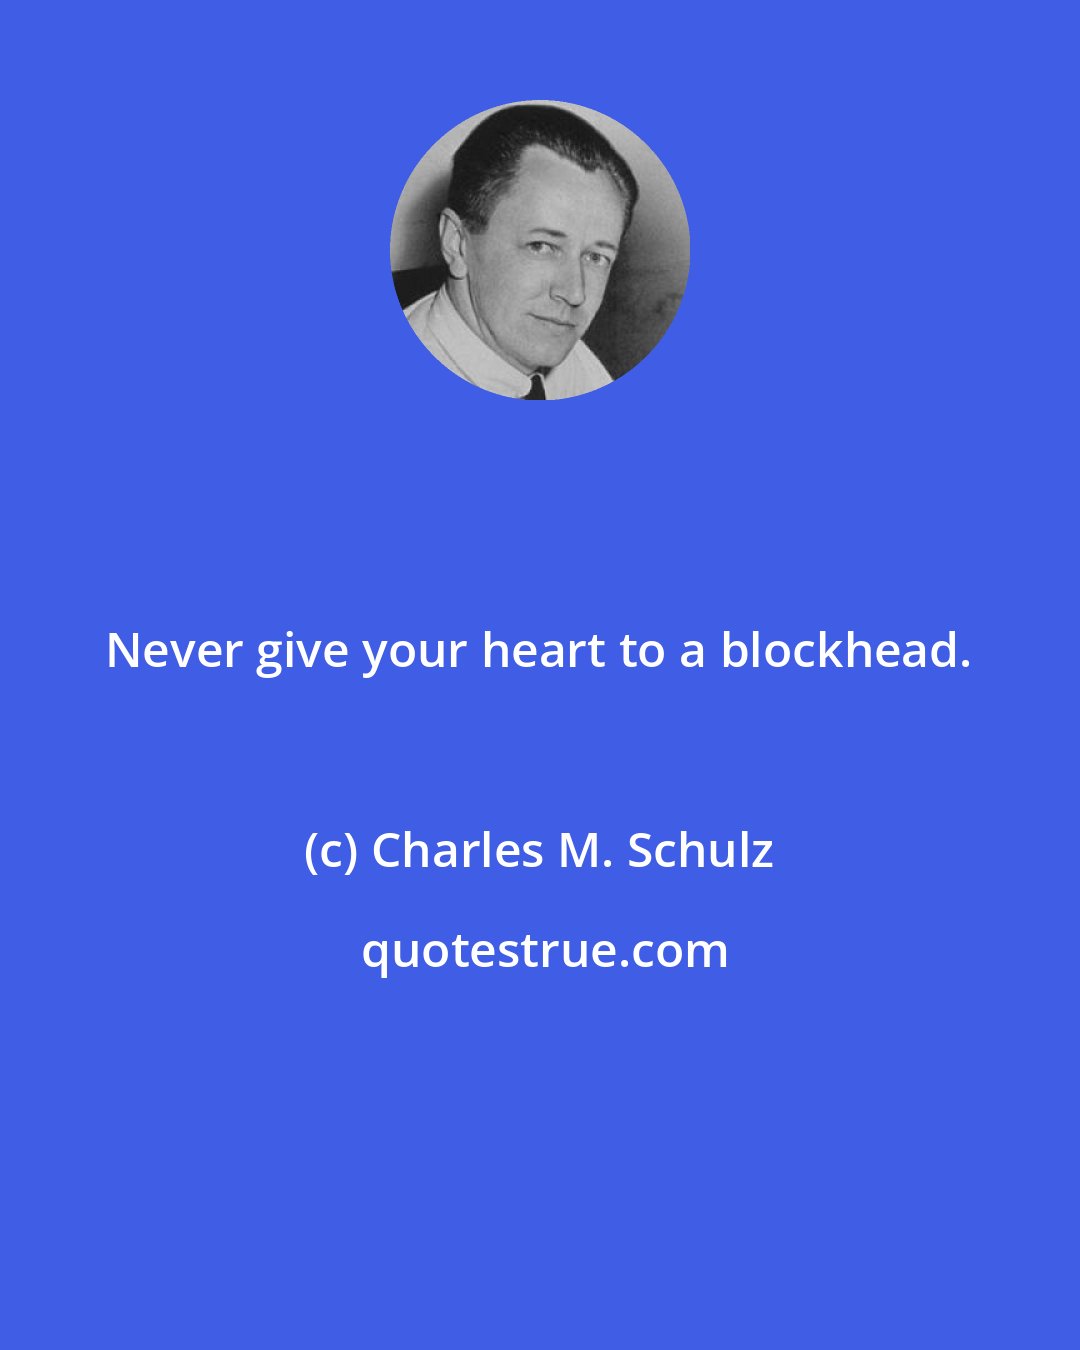 Charles M. Schulz: Never give your heart to a blockhead.